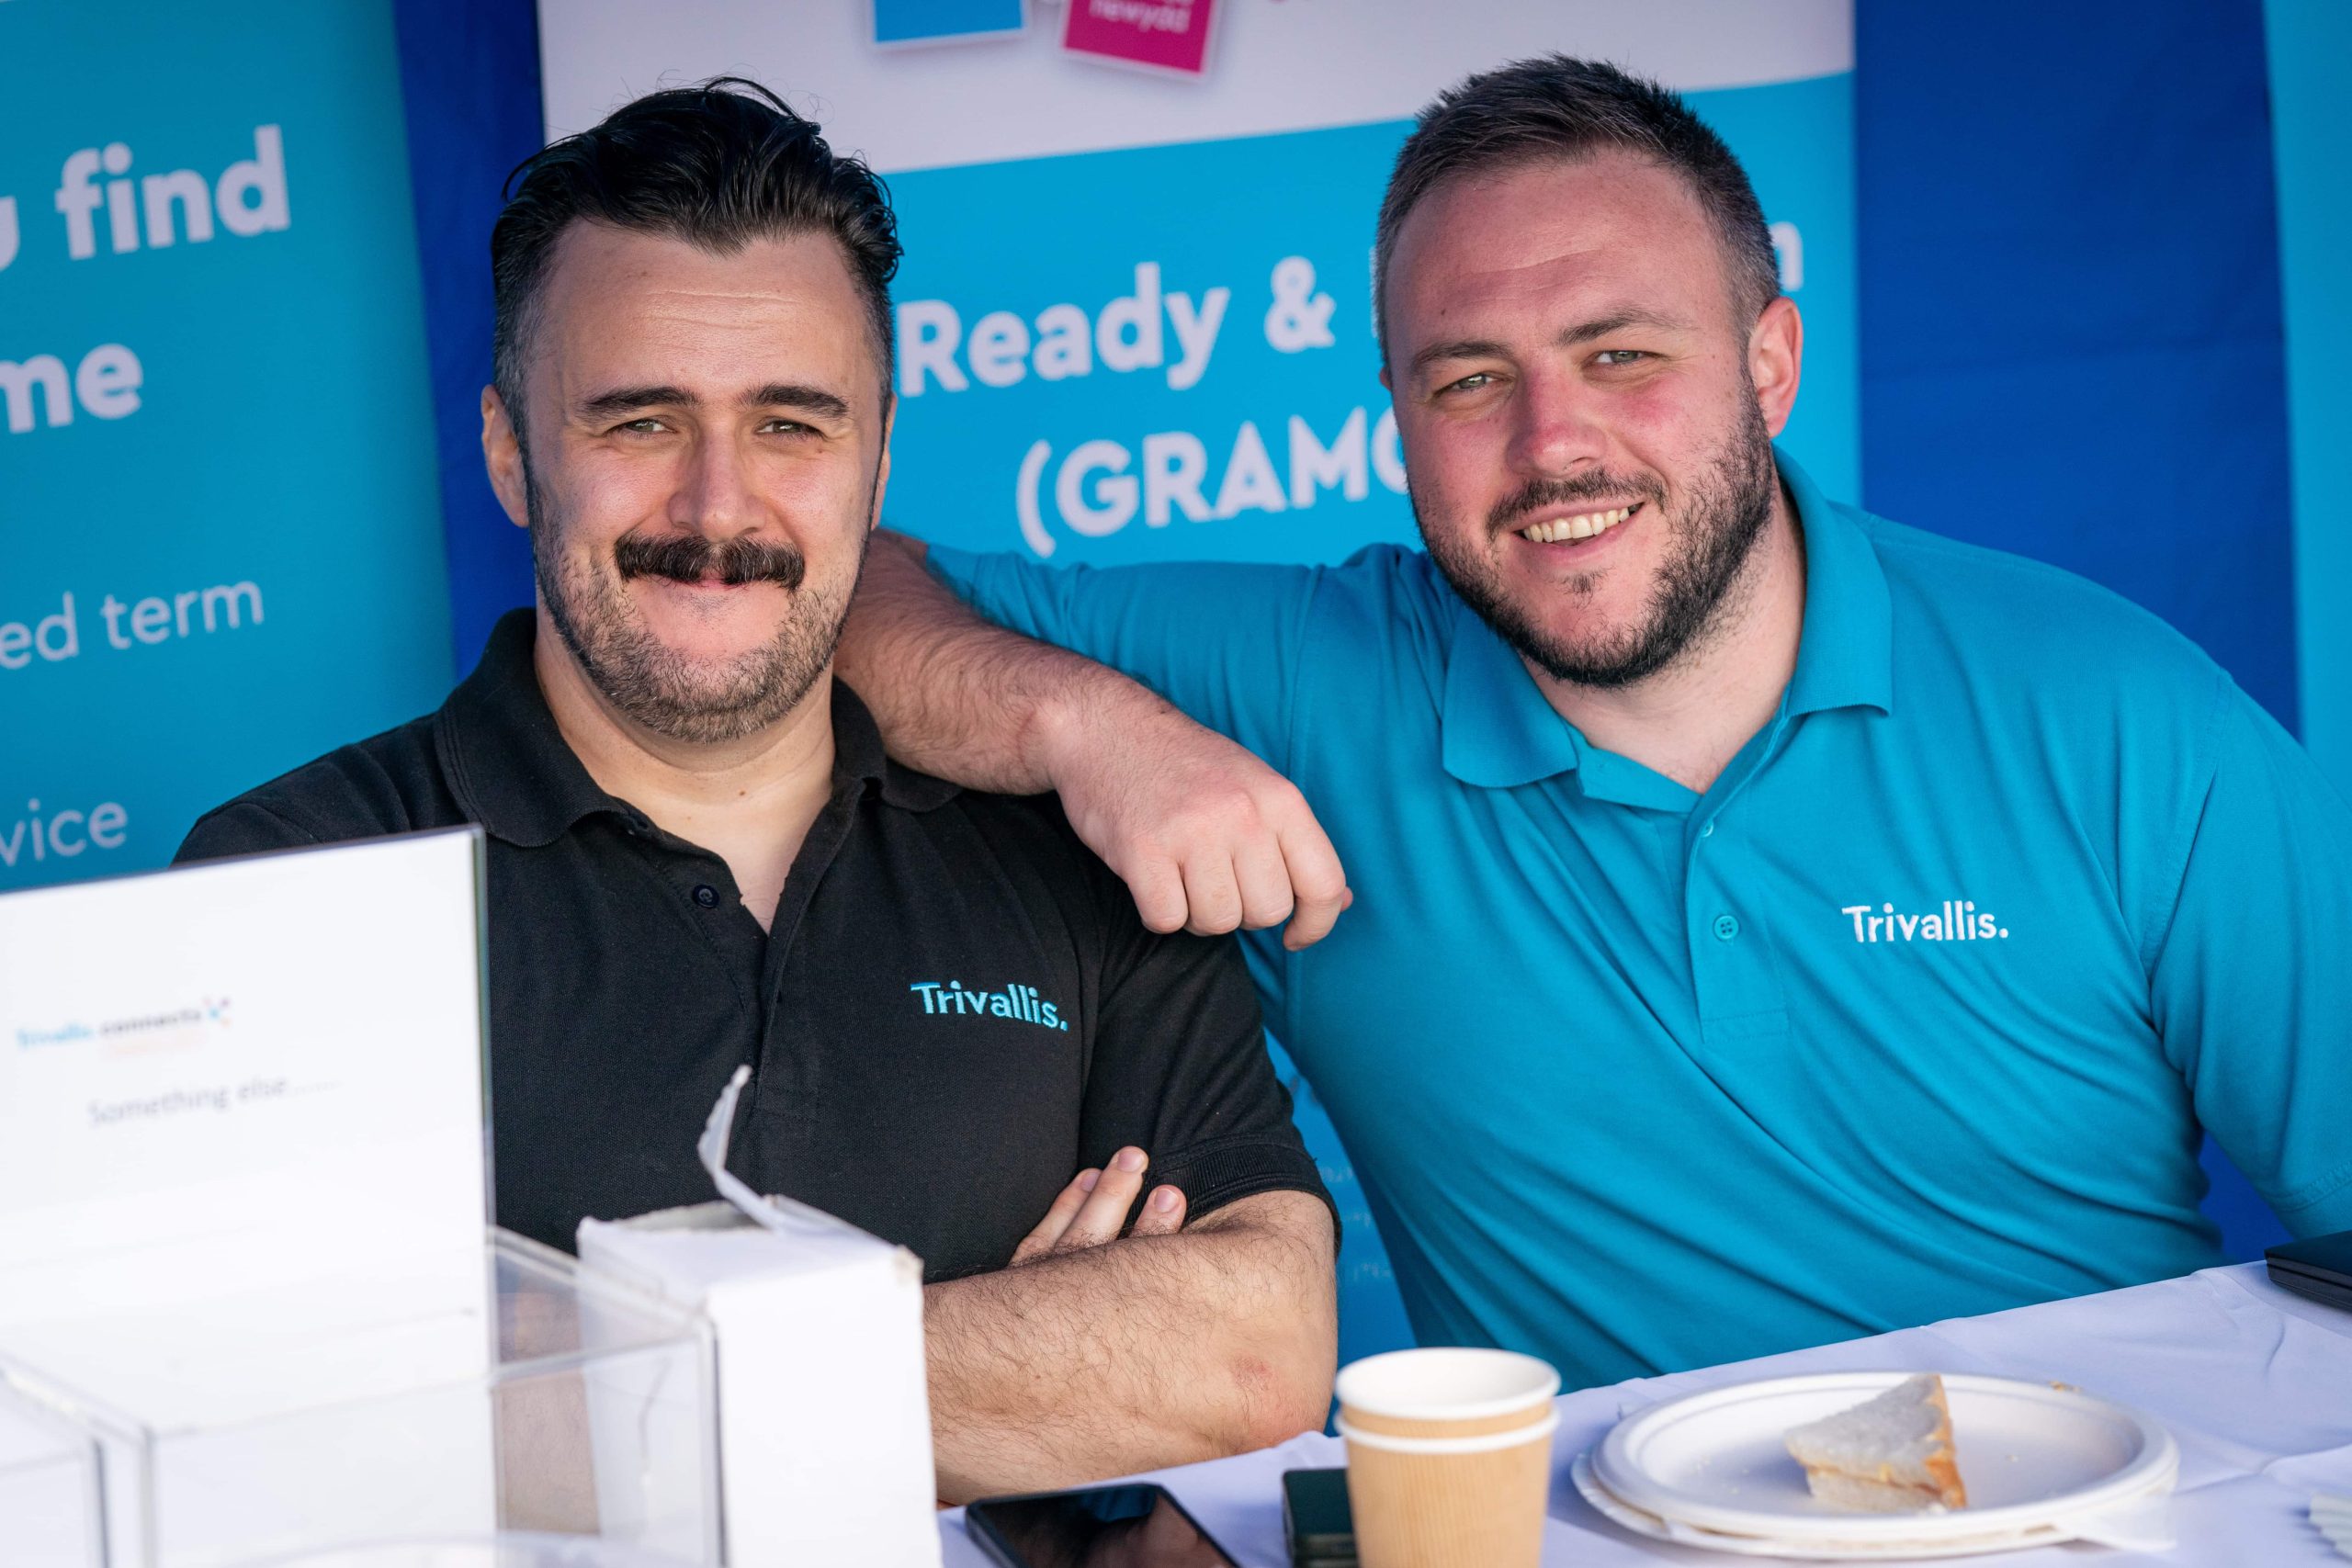 Trivallis Housing Landlord Wales Two men wearing Trivallis-branded polo shirts are smiling and posing at an outdoor housing event, with a promotional stand in the background and a table with paperwork and a coffee cup in the foreground.